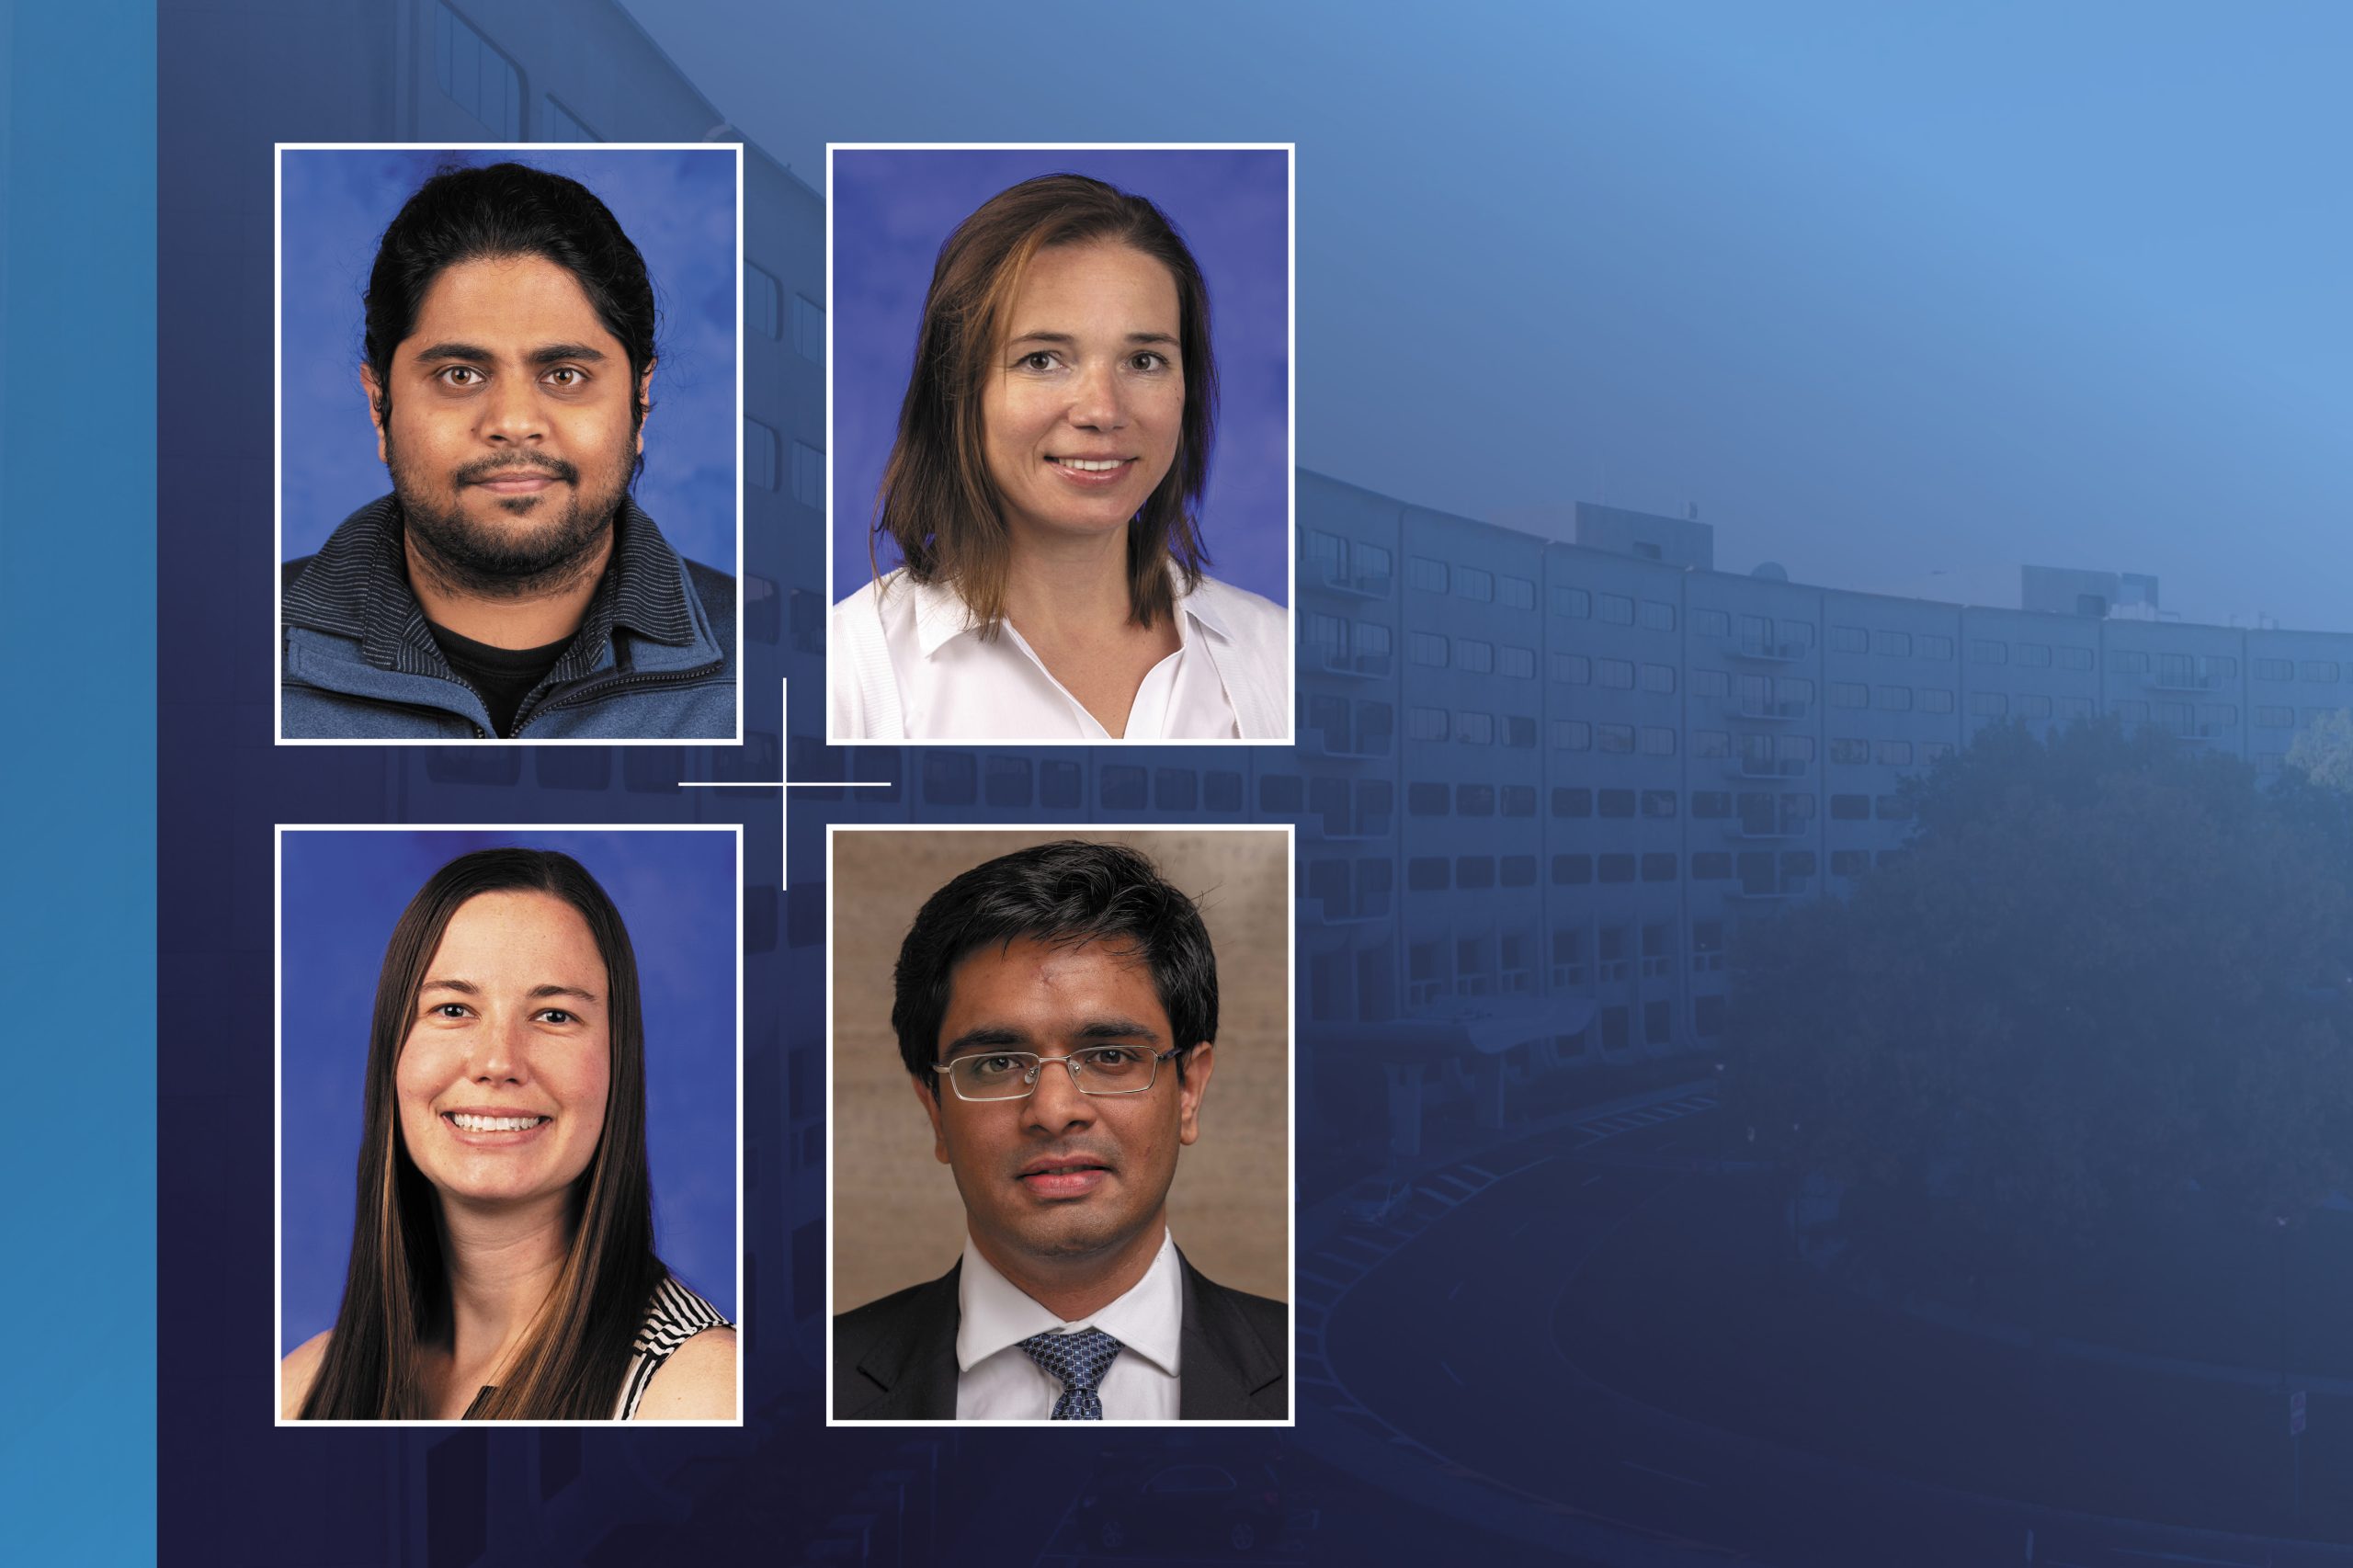 Four professional portraits are boxed over a background of the Crescent Building. On the top row from left are Navaneetha Bharathan and Marina Chulkina. On the bottom row from left are Stephanie Schell and Siddharth Sunilkumar.